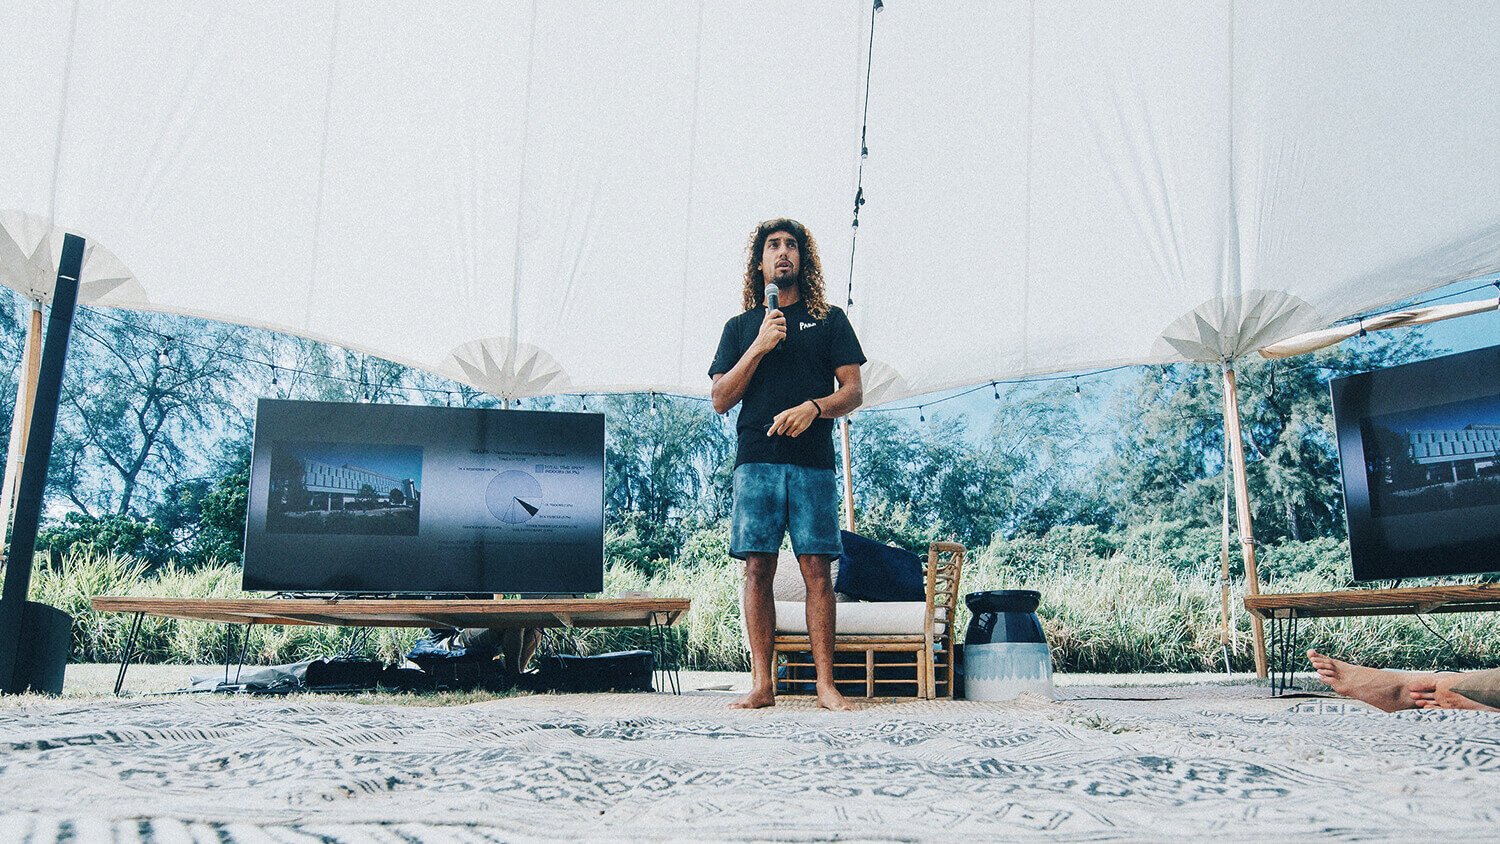  Cliff at Parley’s Ocean Uprise Camp in 2019  Photo by: Raul Aragão  